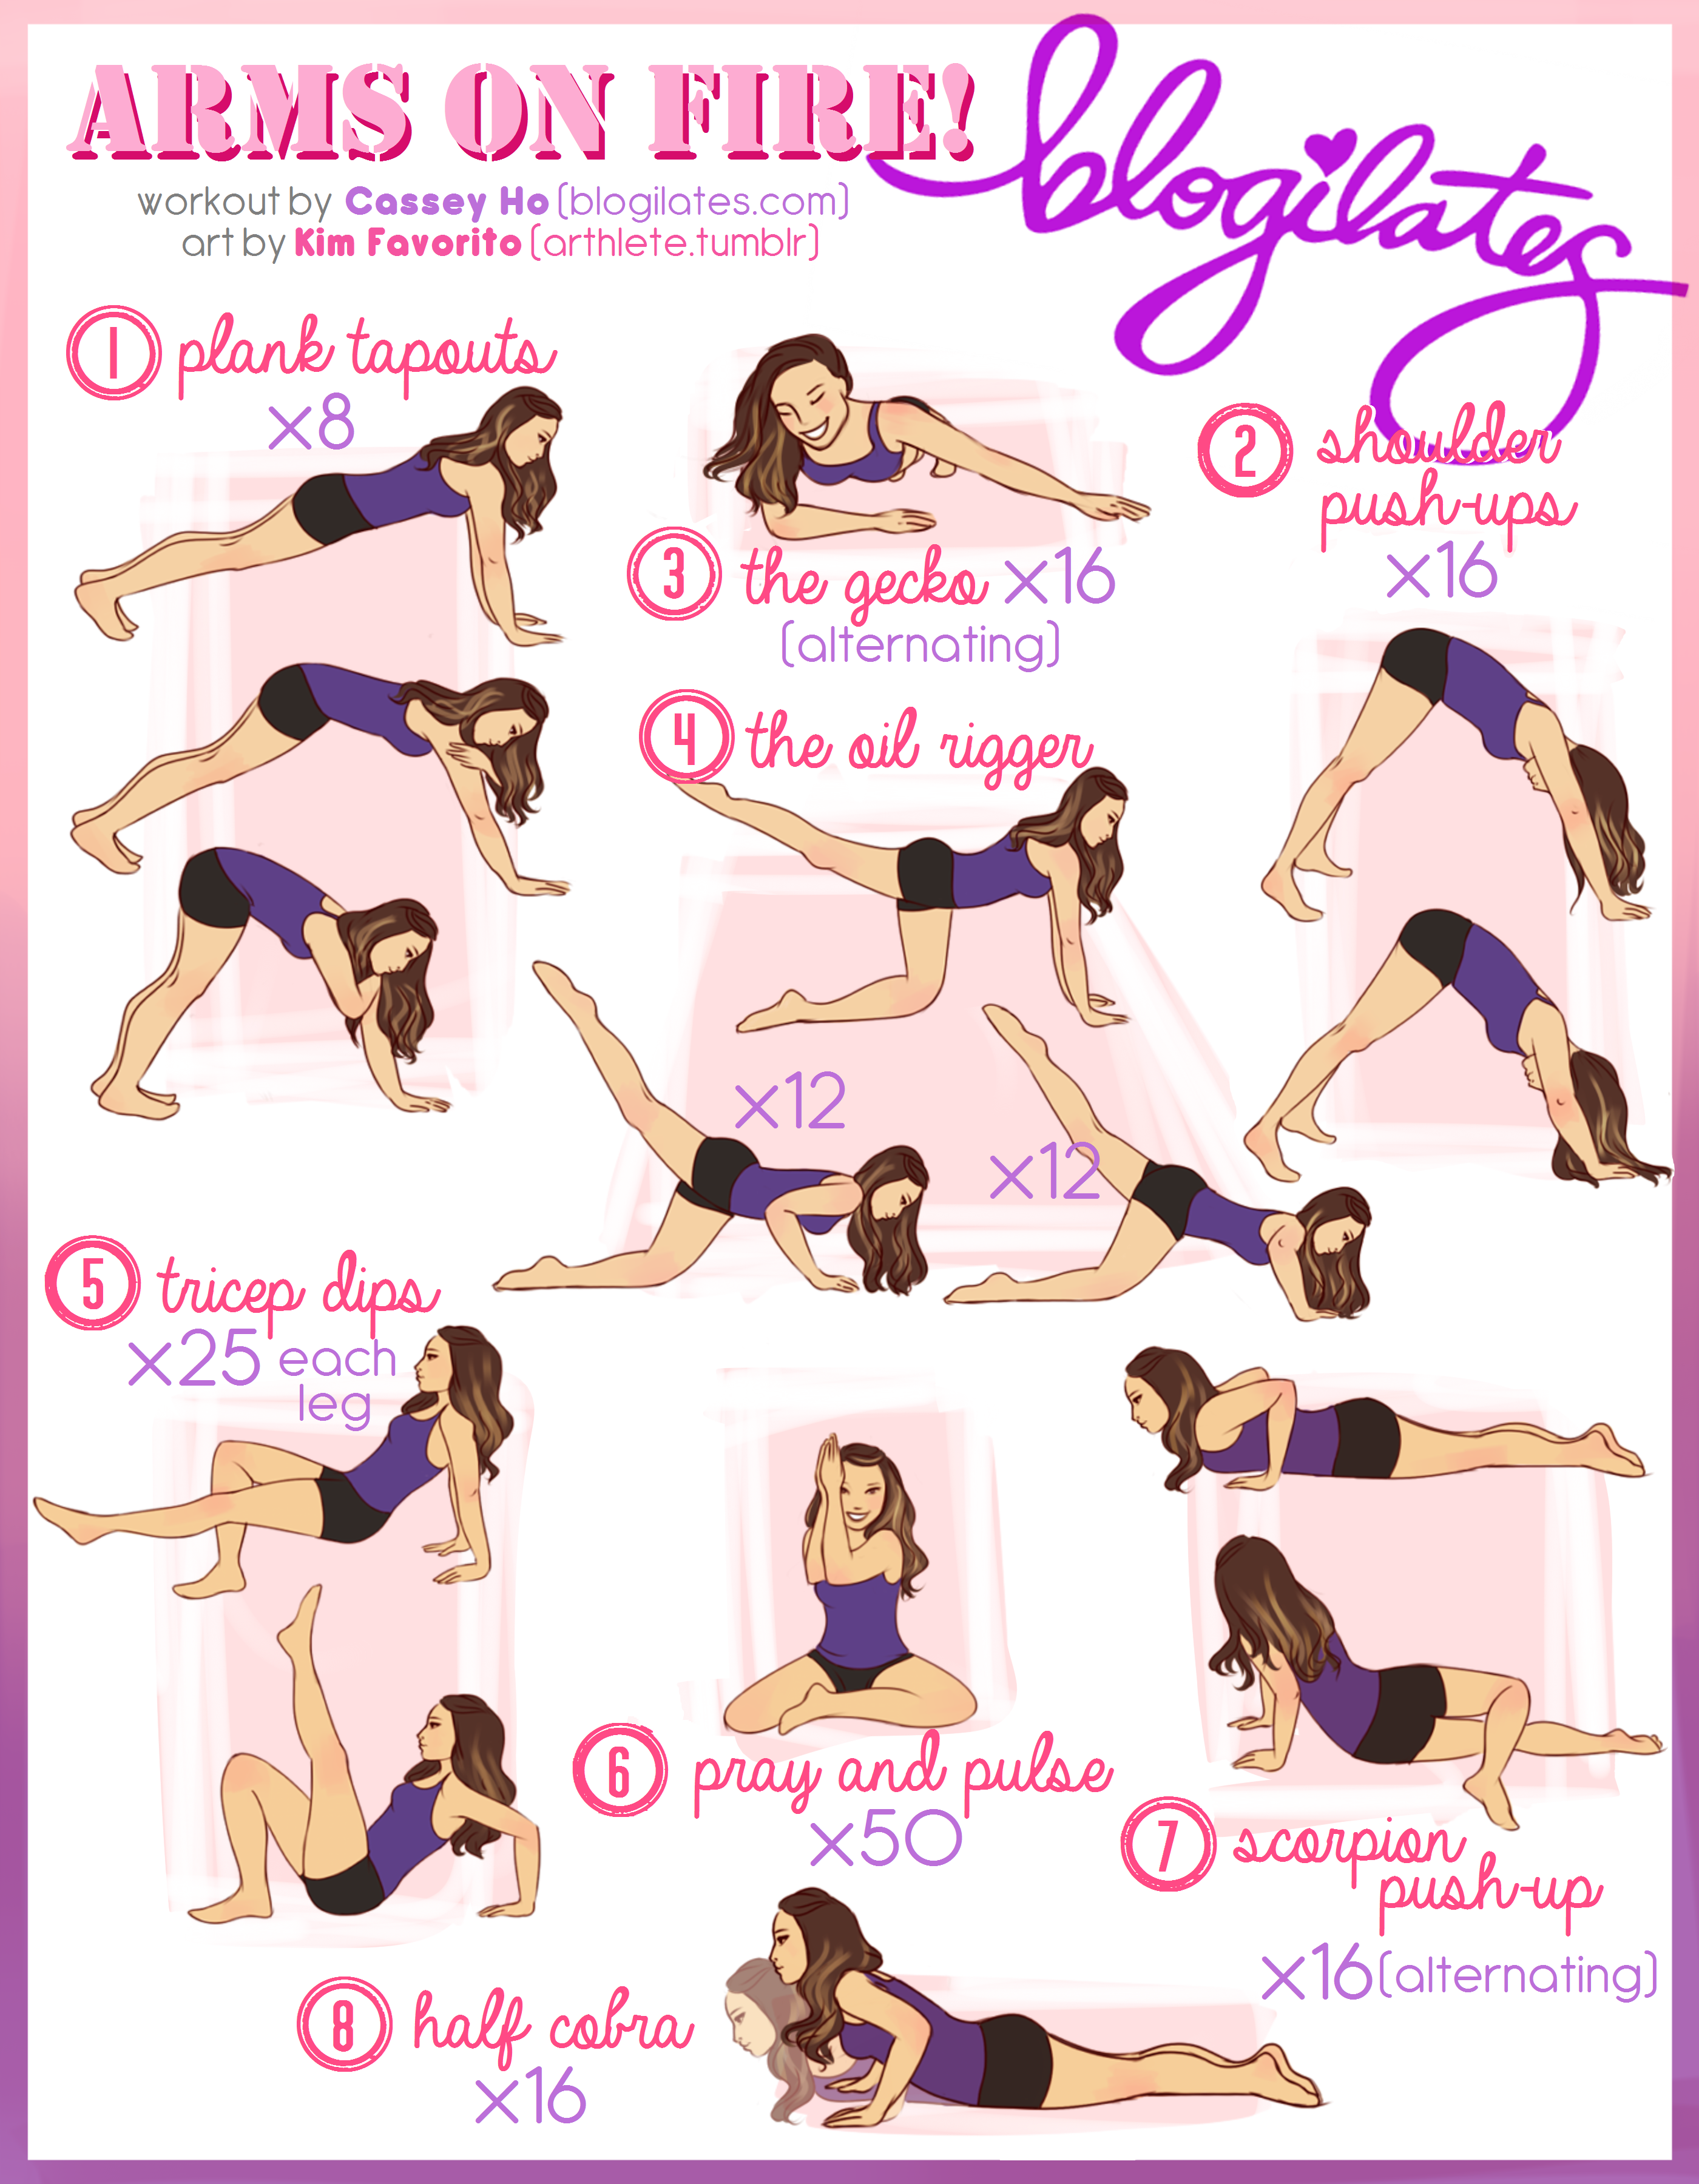 https://www.blogilates.com/wp-content/uploads/2013/07/arms-on-fire.png